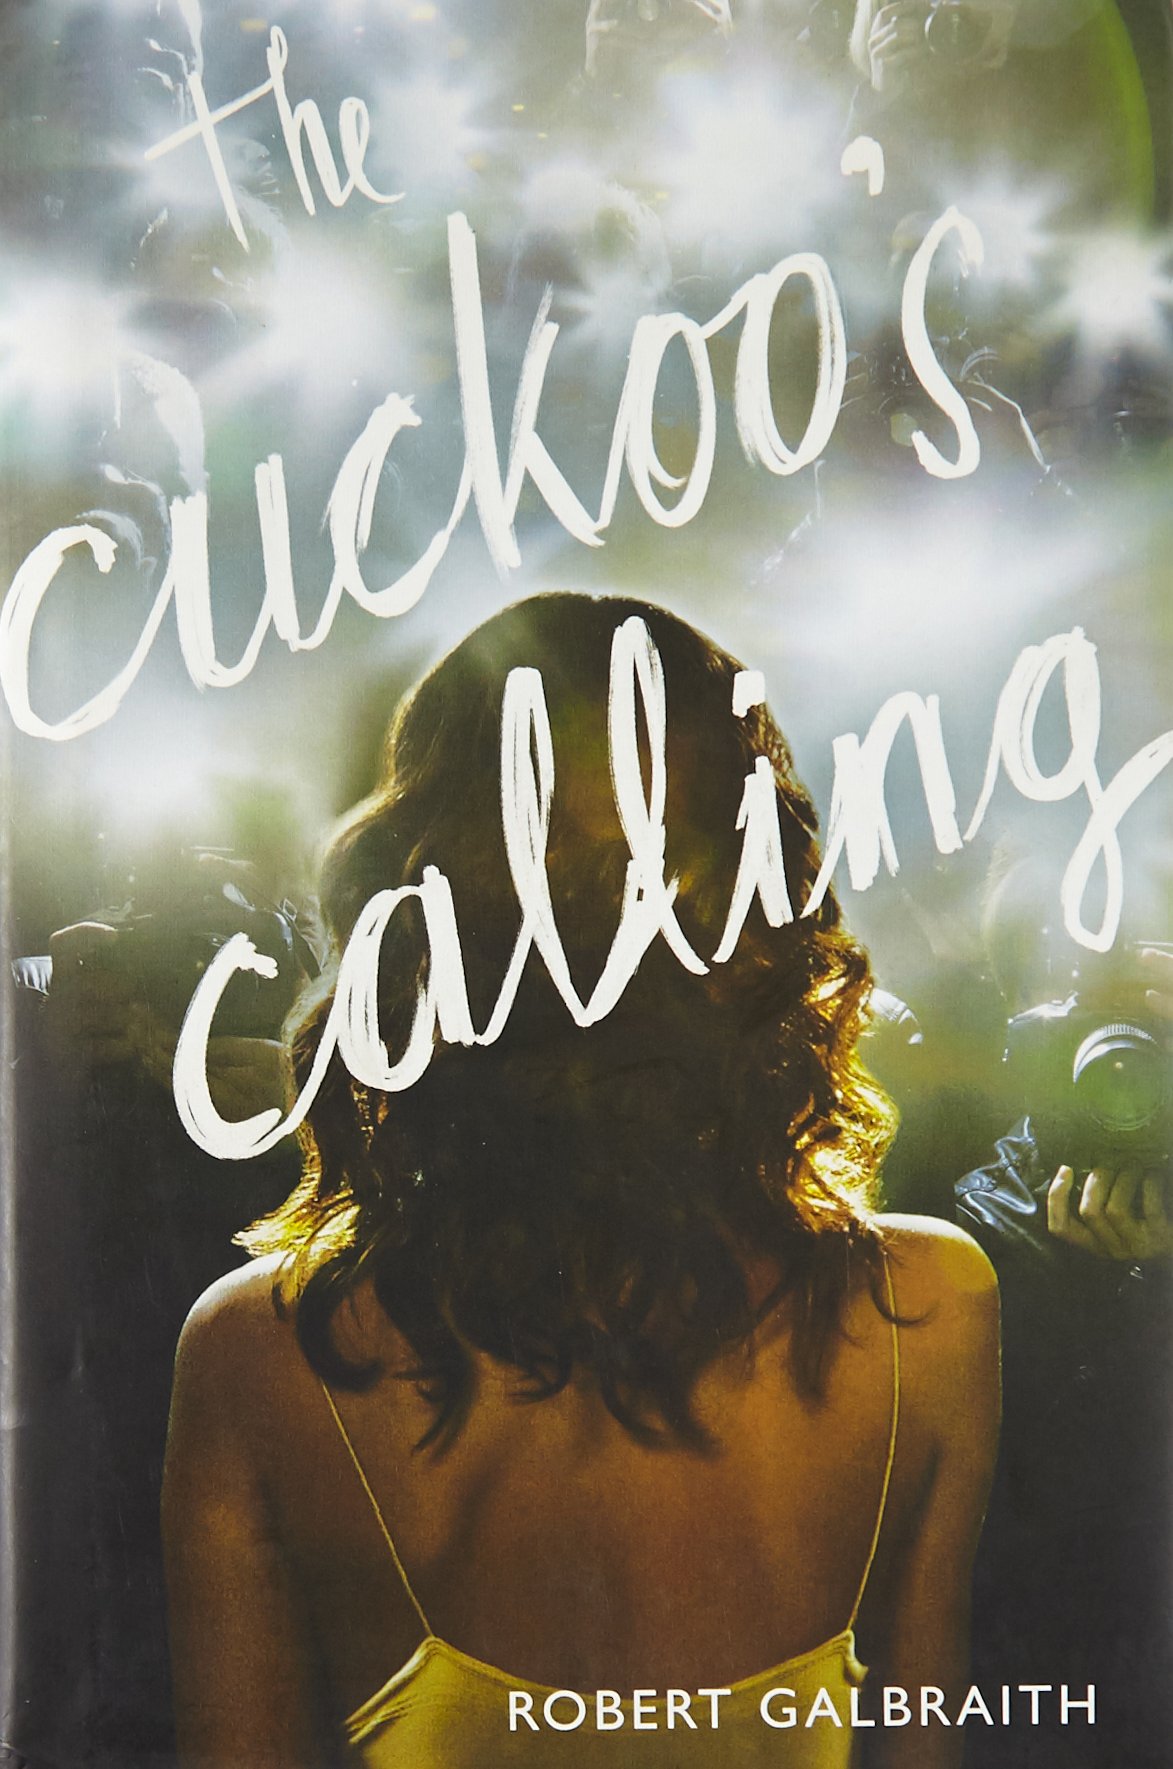 The Cuckoo's Calling Book Cover